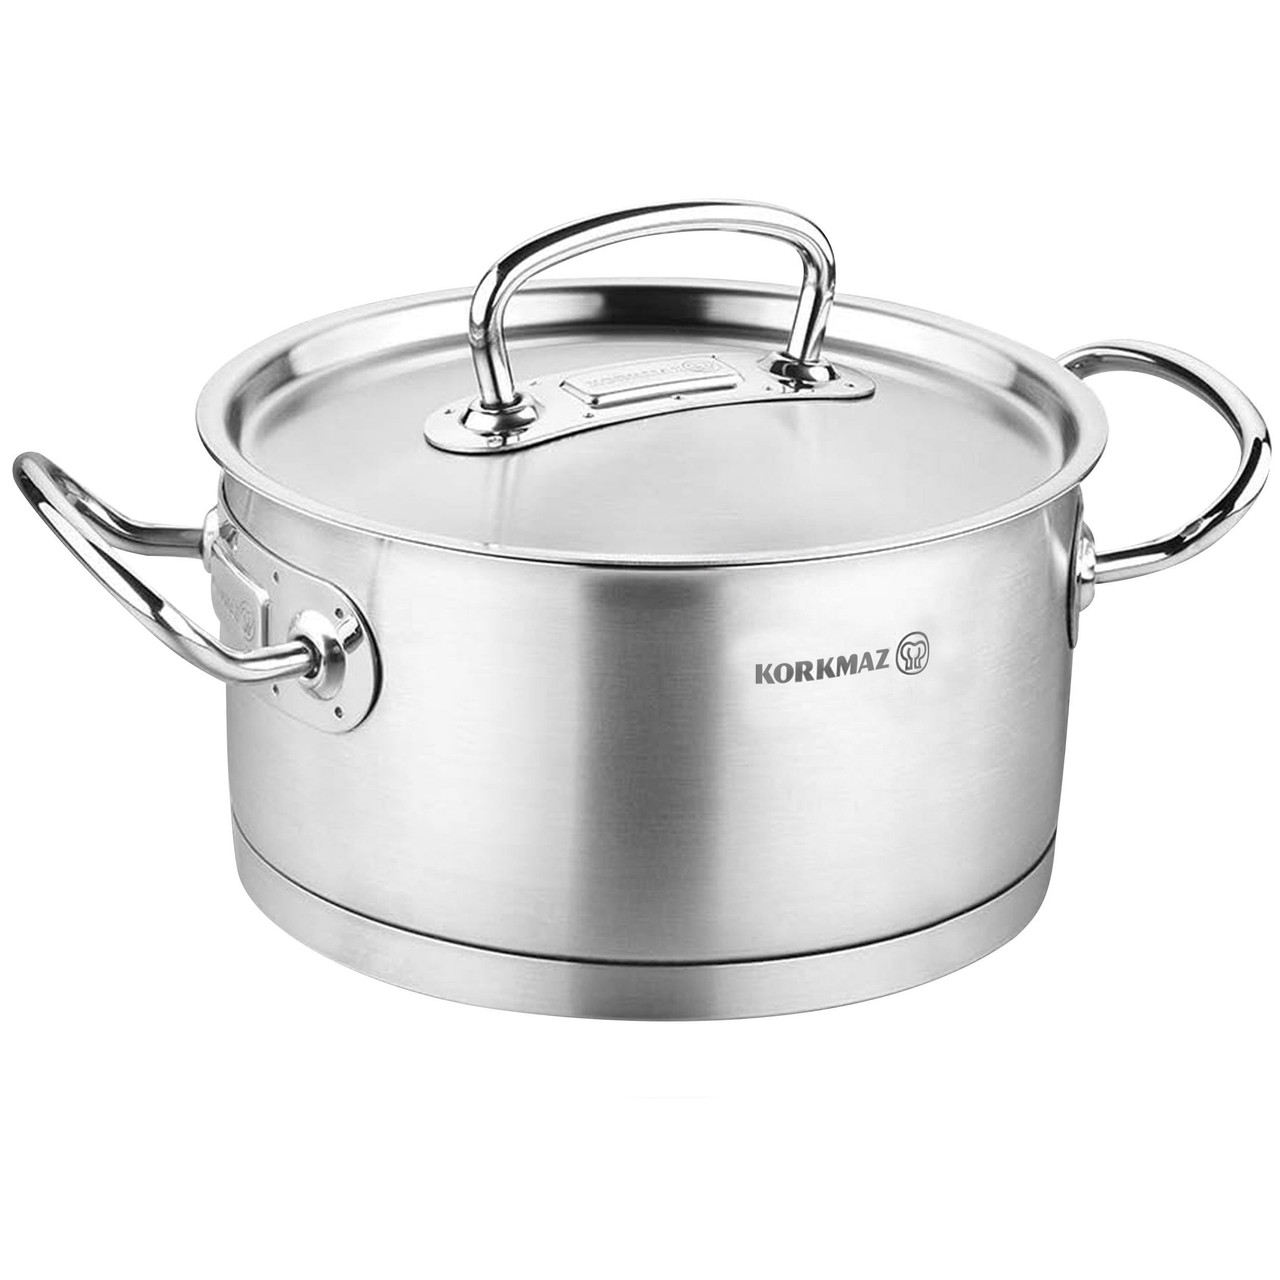 Korkmaz Proline Professional Series 1.5 Liter Stainless Steel Low Casserole with Lid in Silver